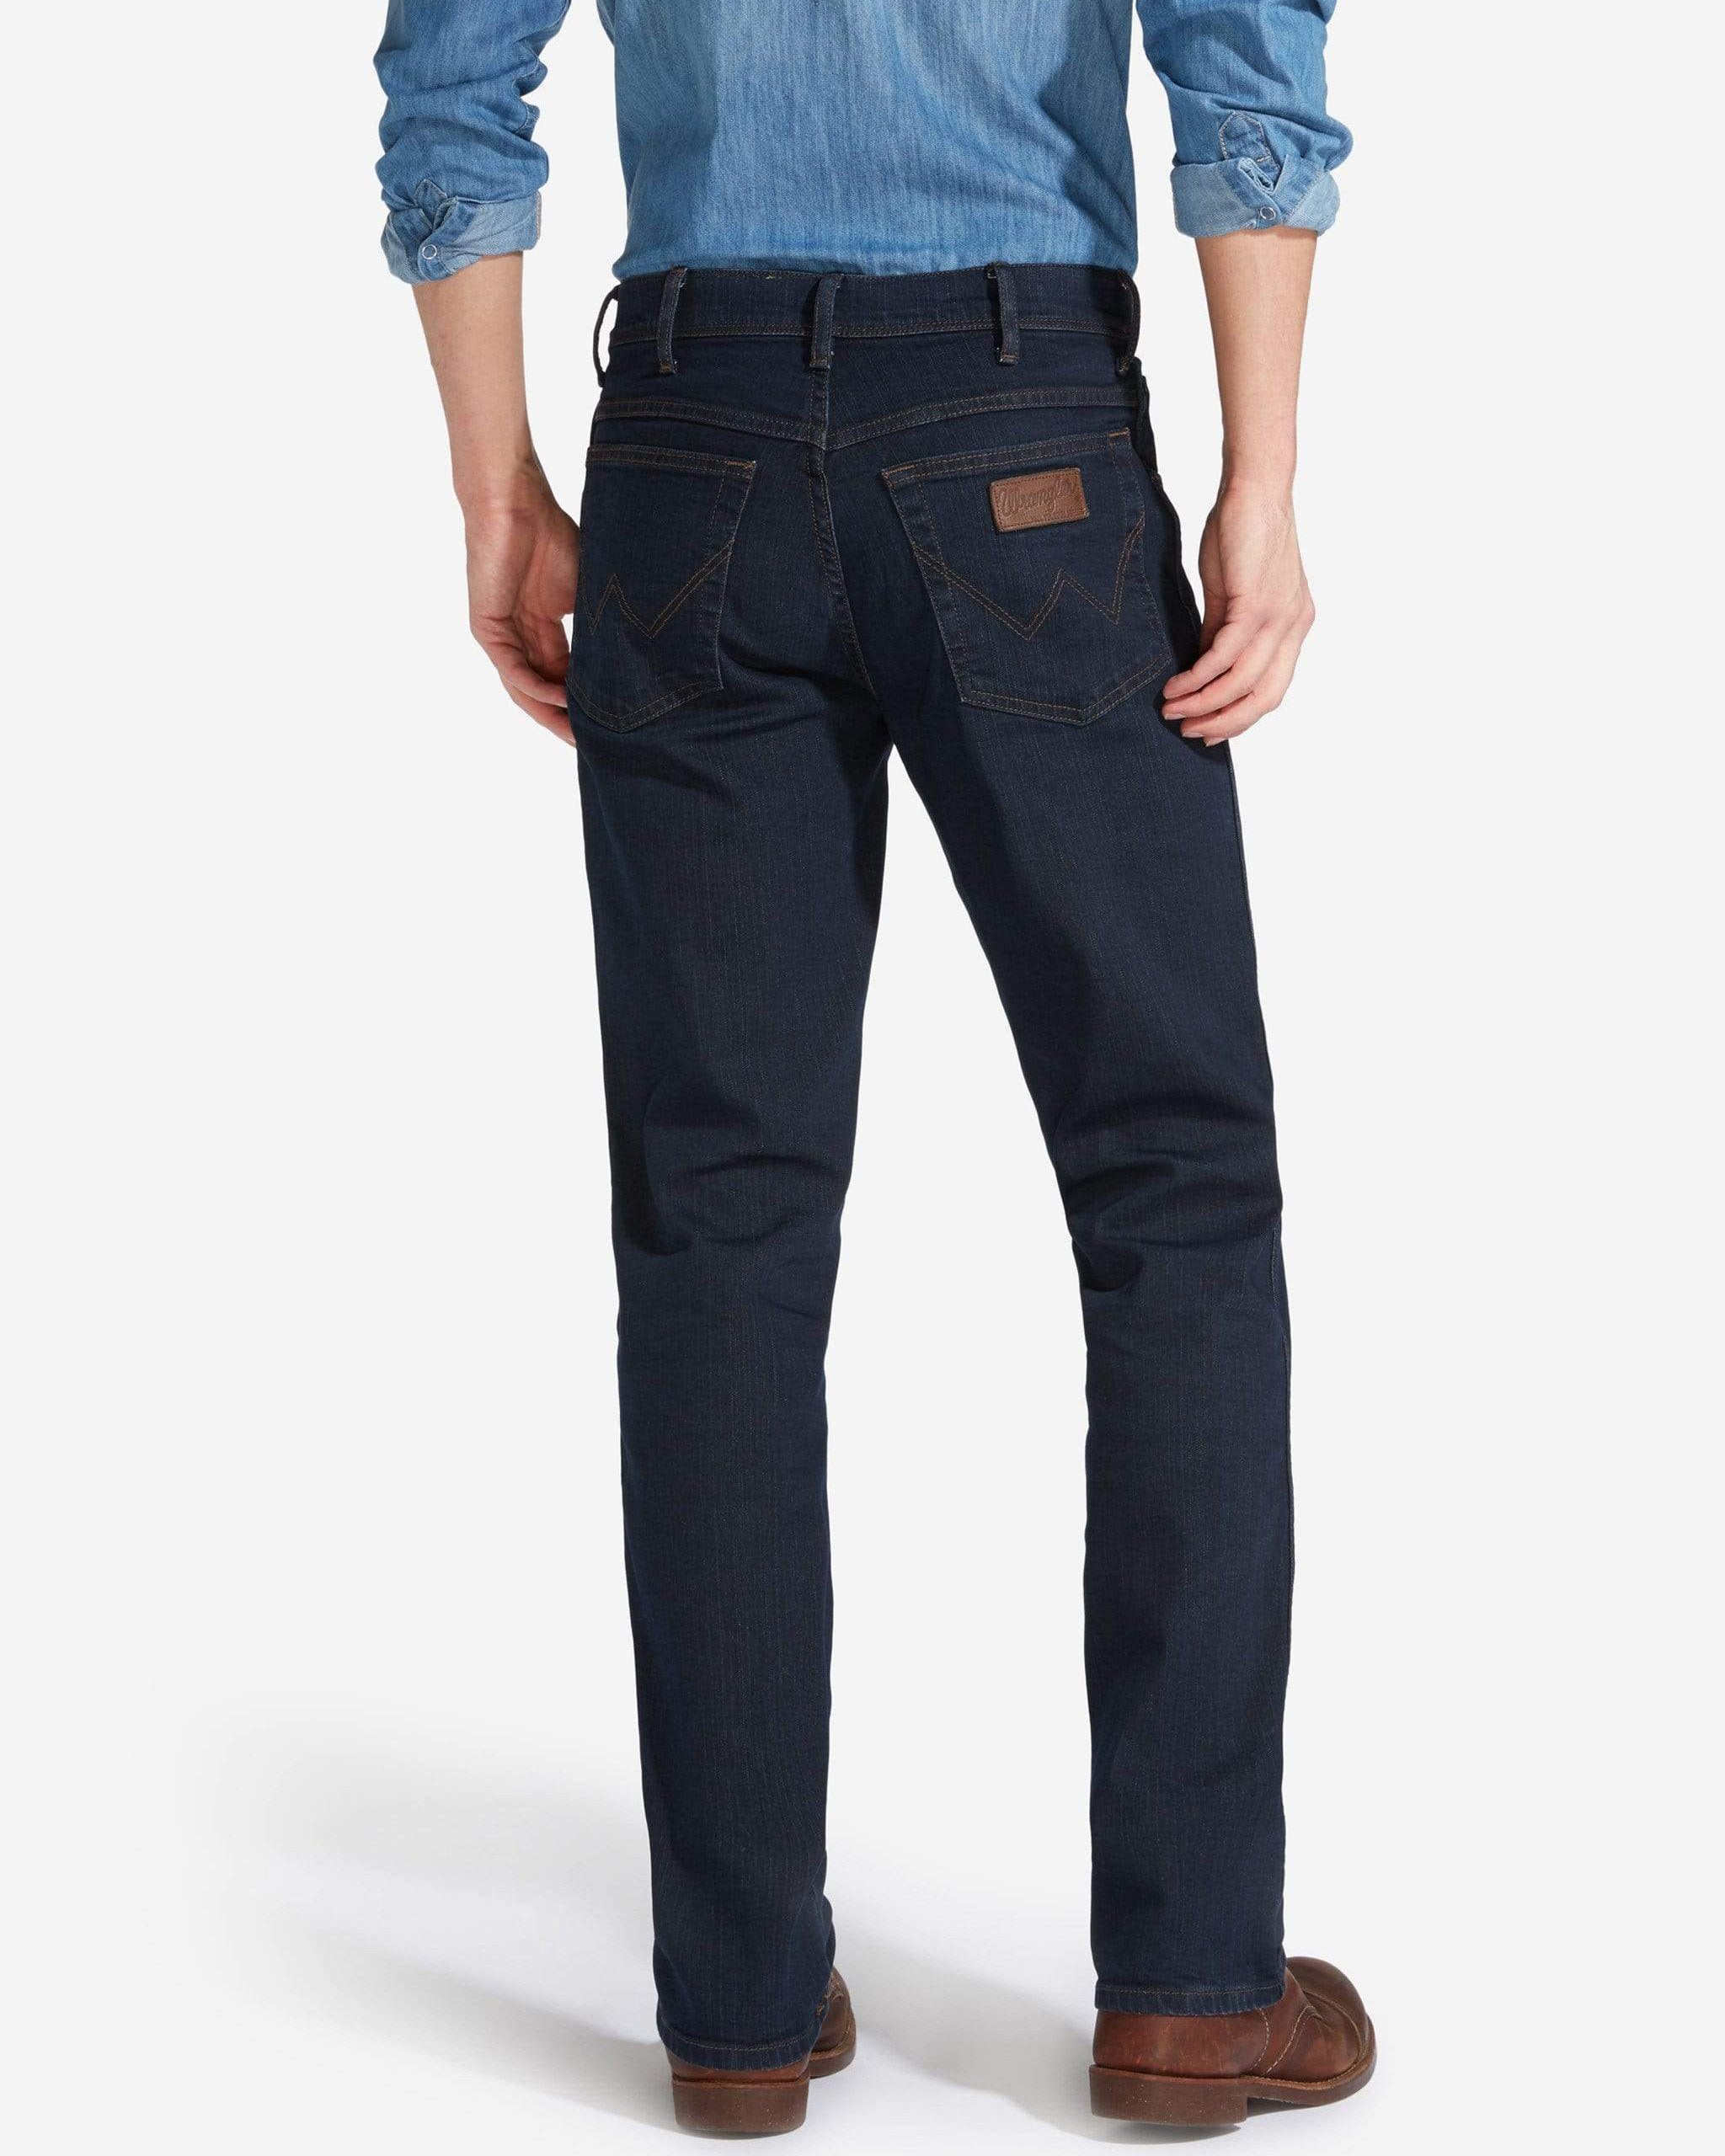 Wrangler Texas Stretch Original Jeans - Blue Black - Jeans and Street Fashion from Jeanstore